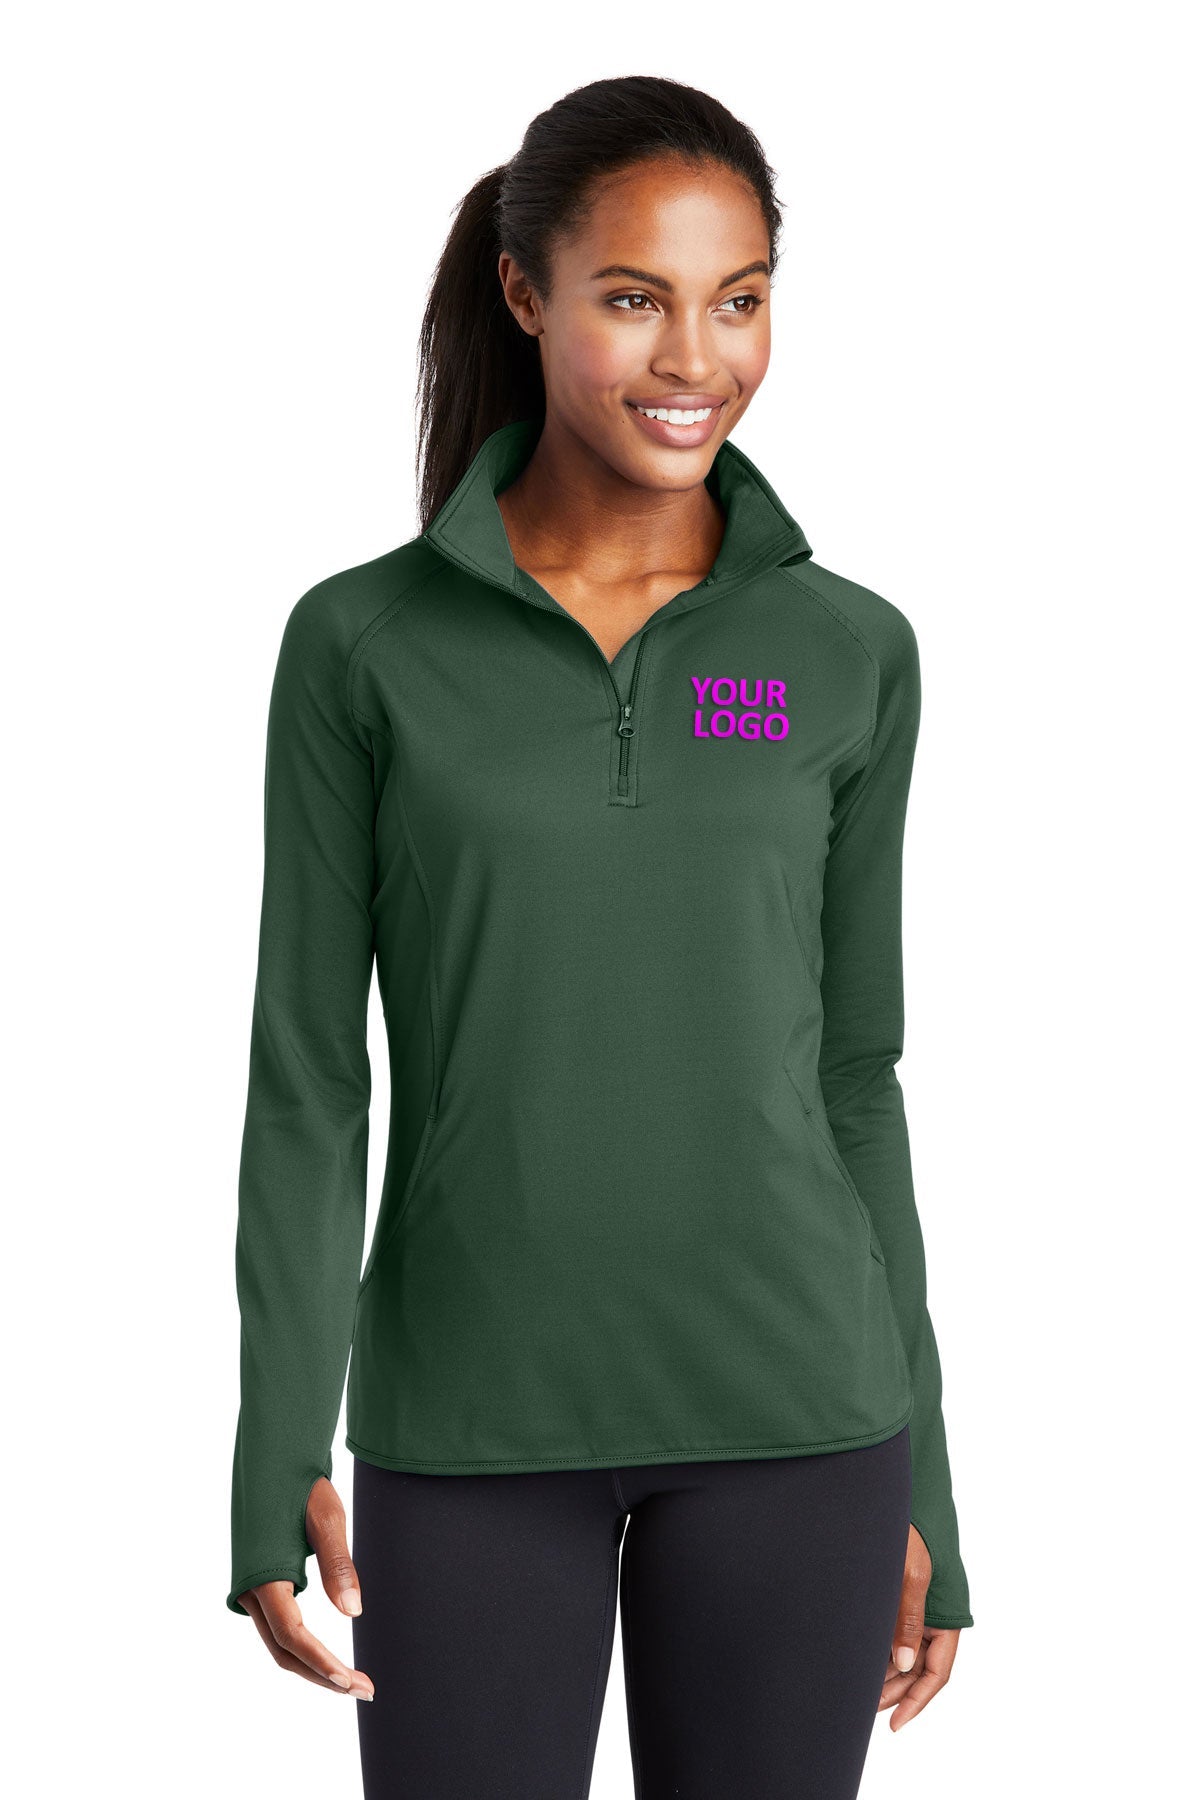 Sport-Tek Forest Green LST850 company sweatshirts embroidered